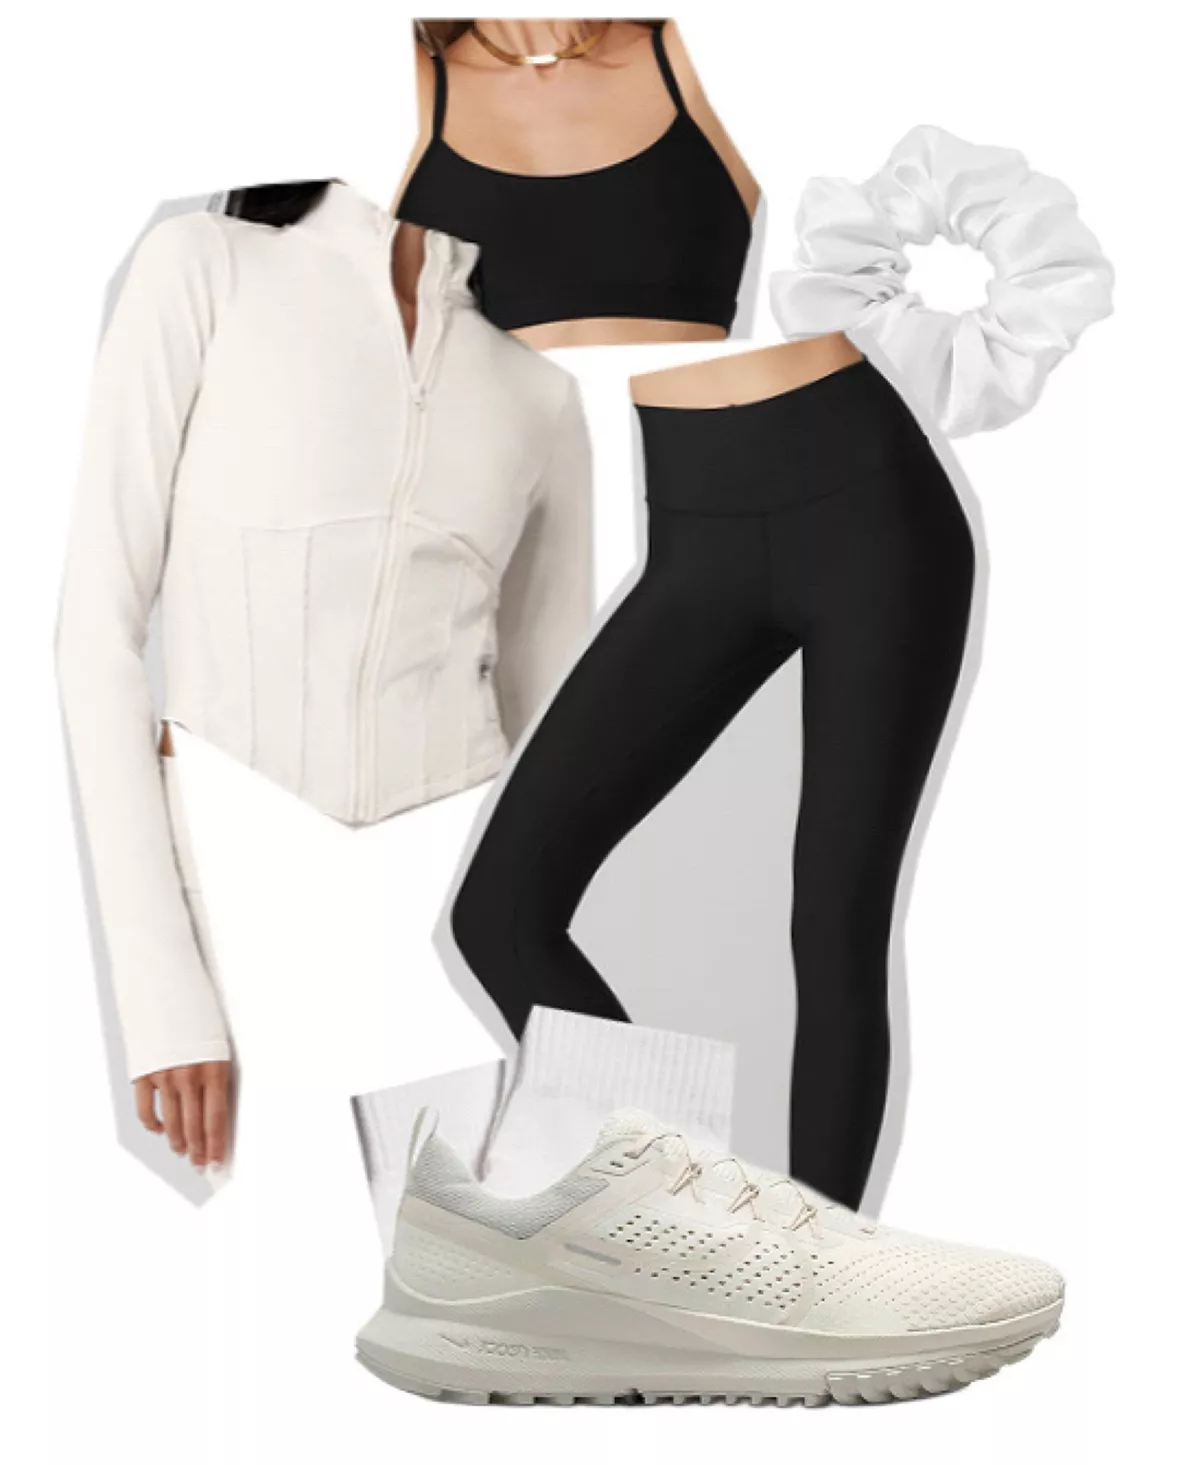 White Sneakers with Black Leggings Outfits (45 ideas & outfits)